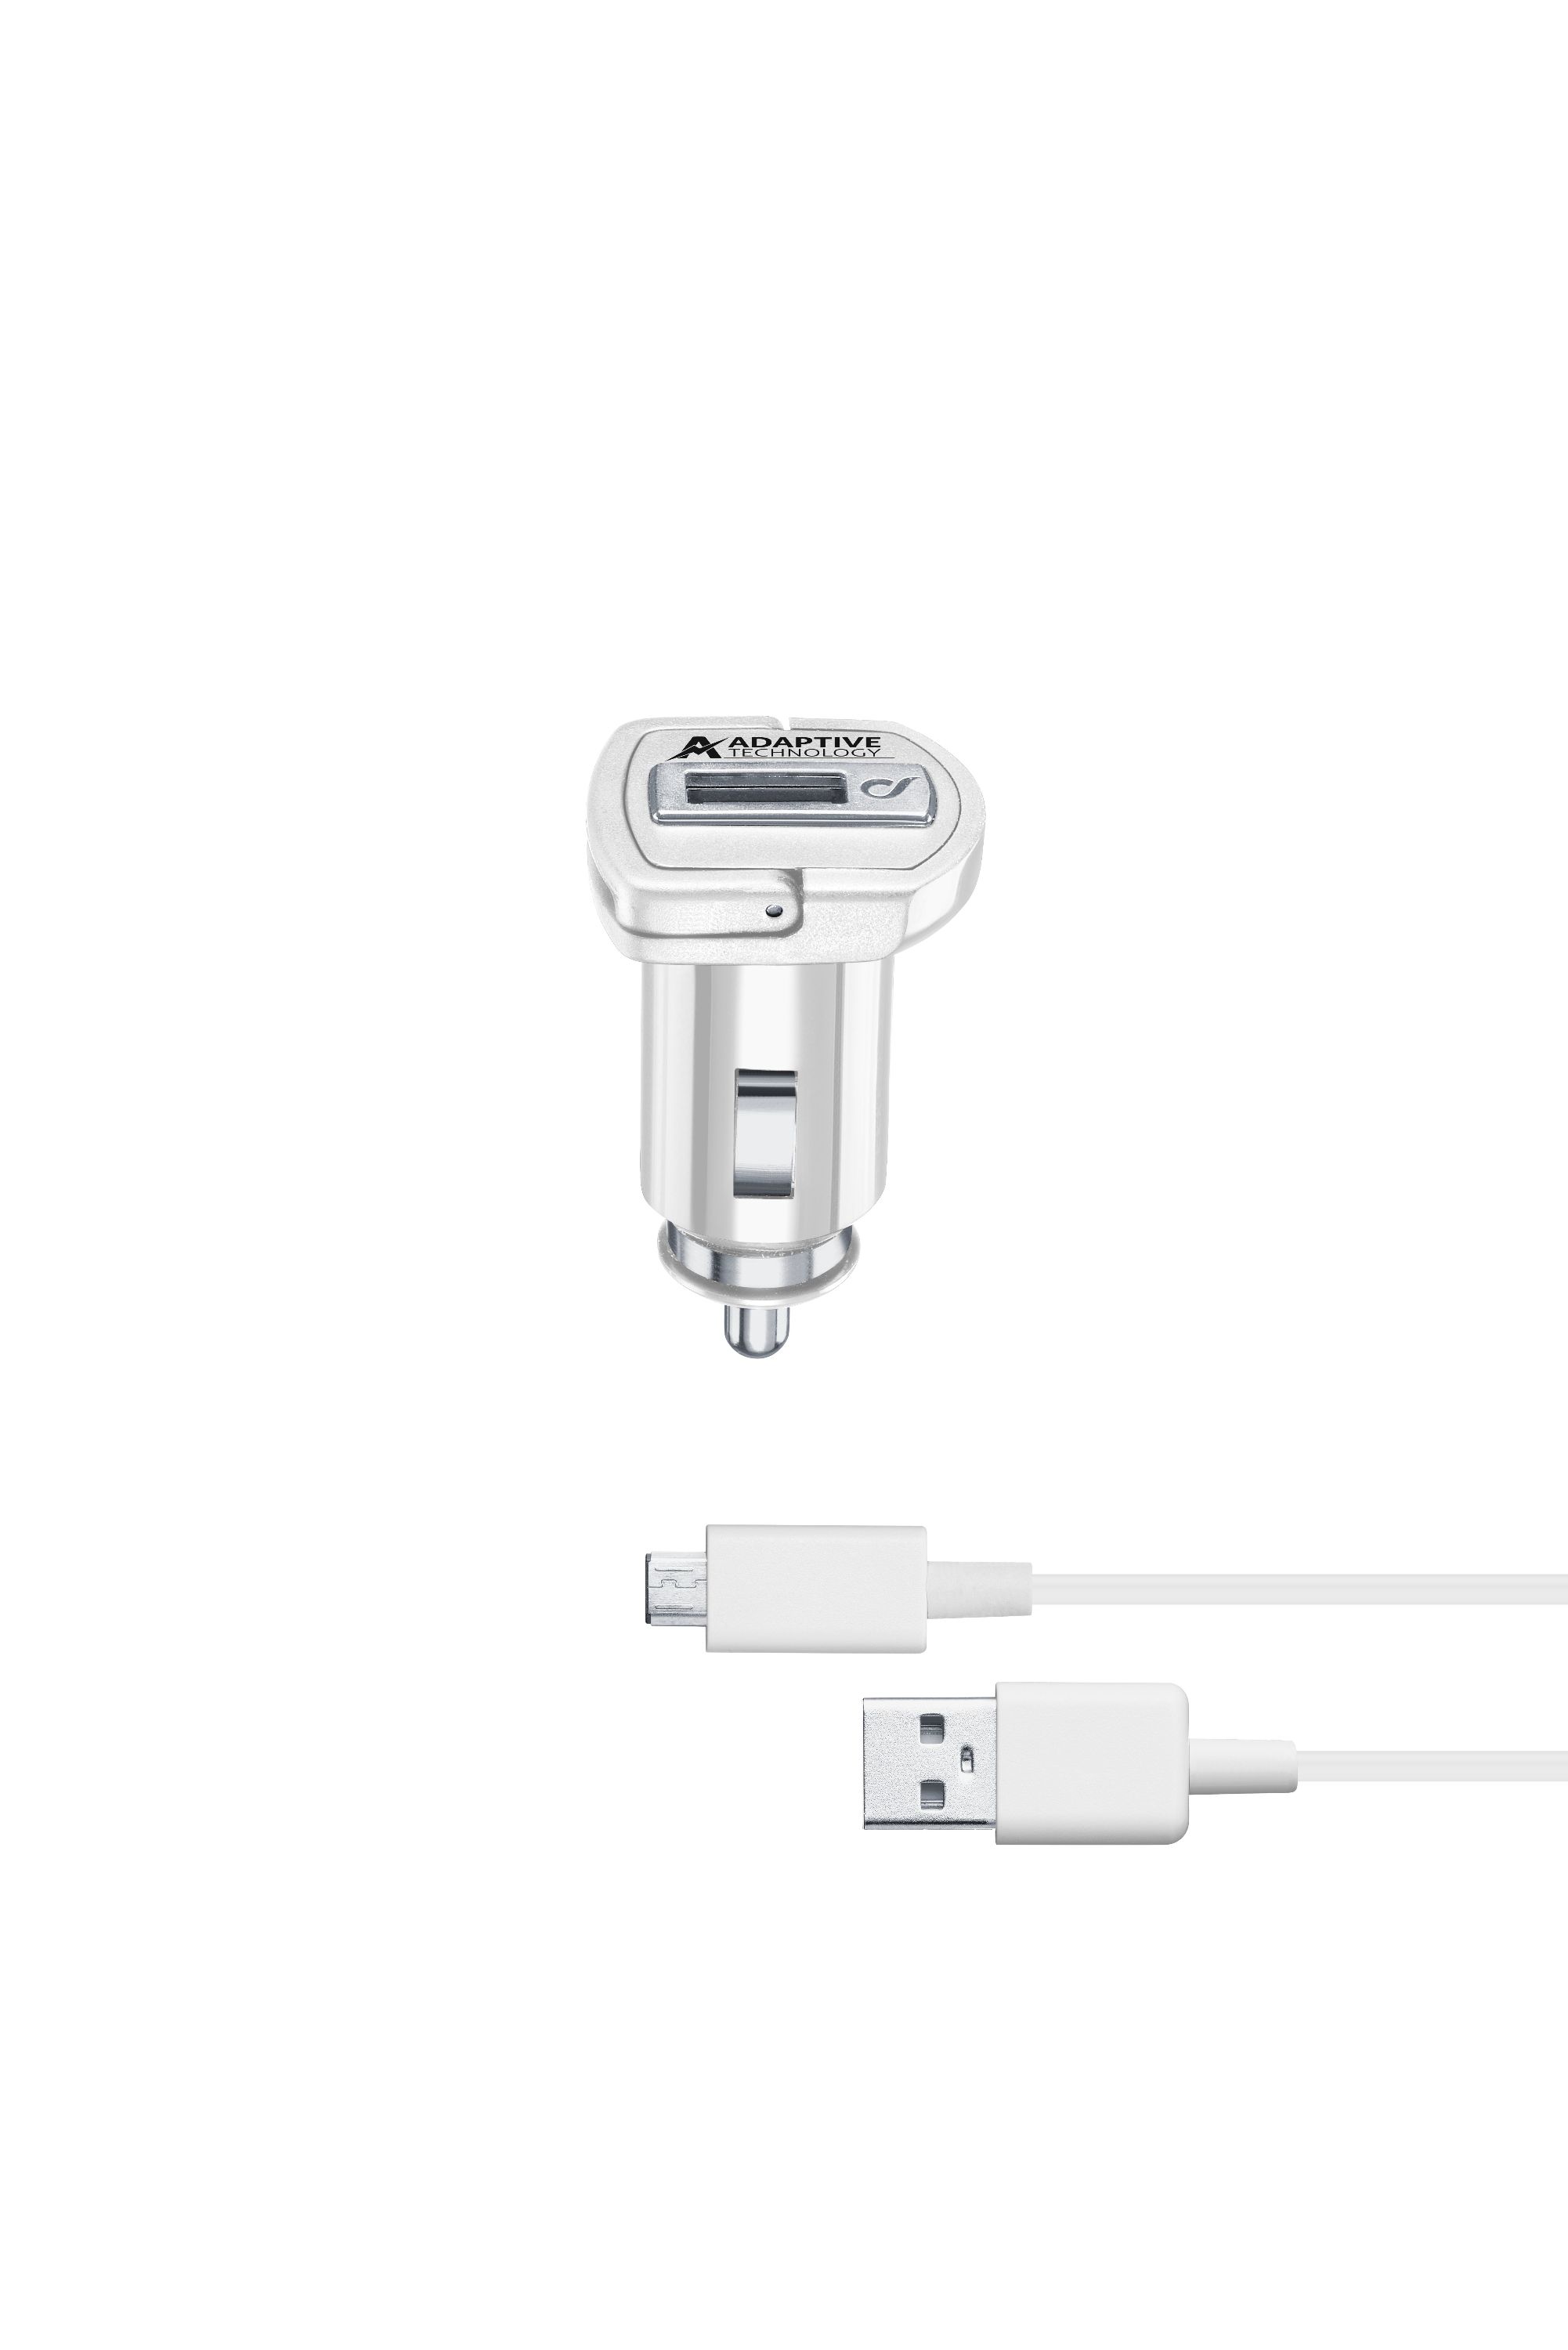 Chargeur voiture kit, 15W micro-usb Samsung adaptif, blanc